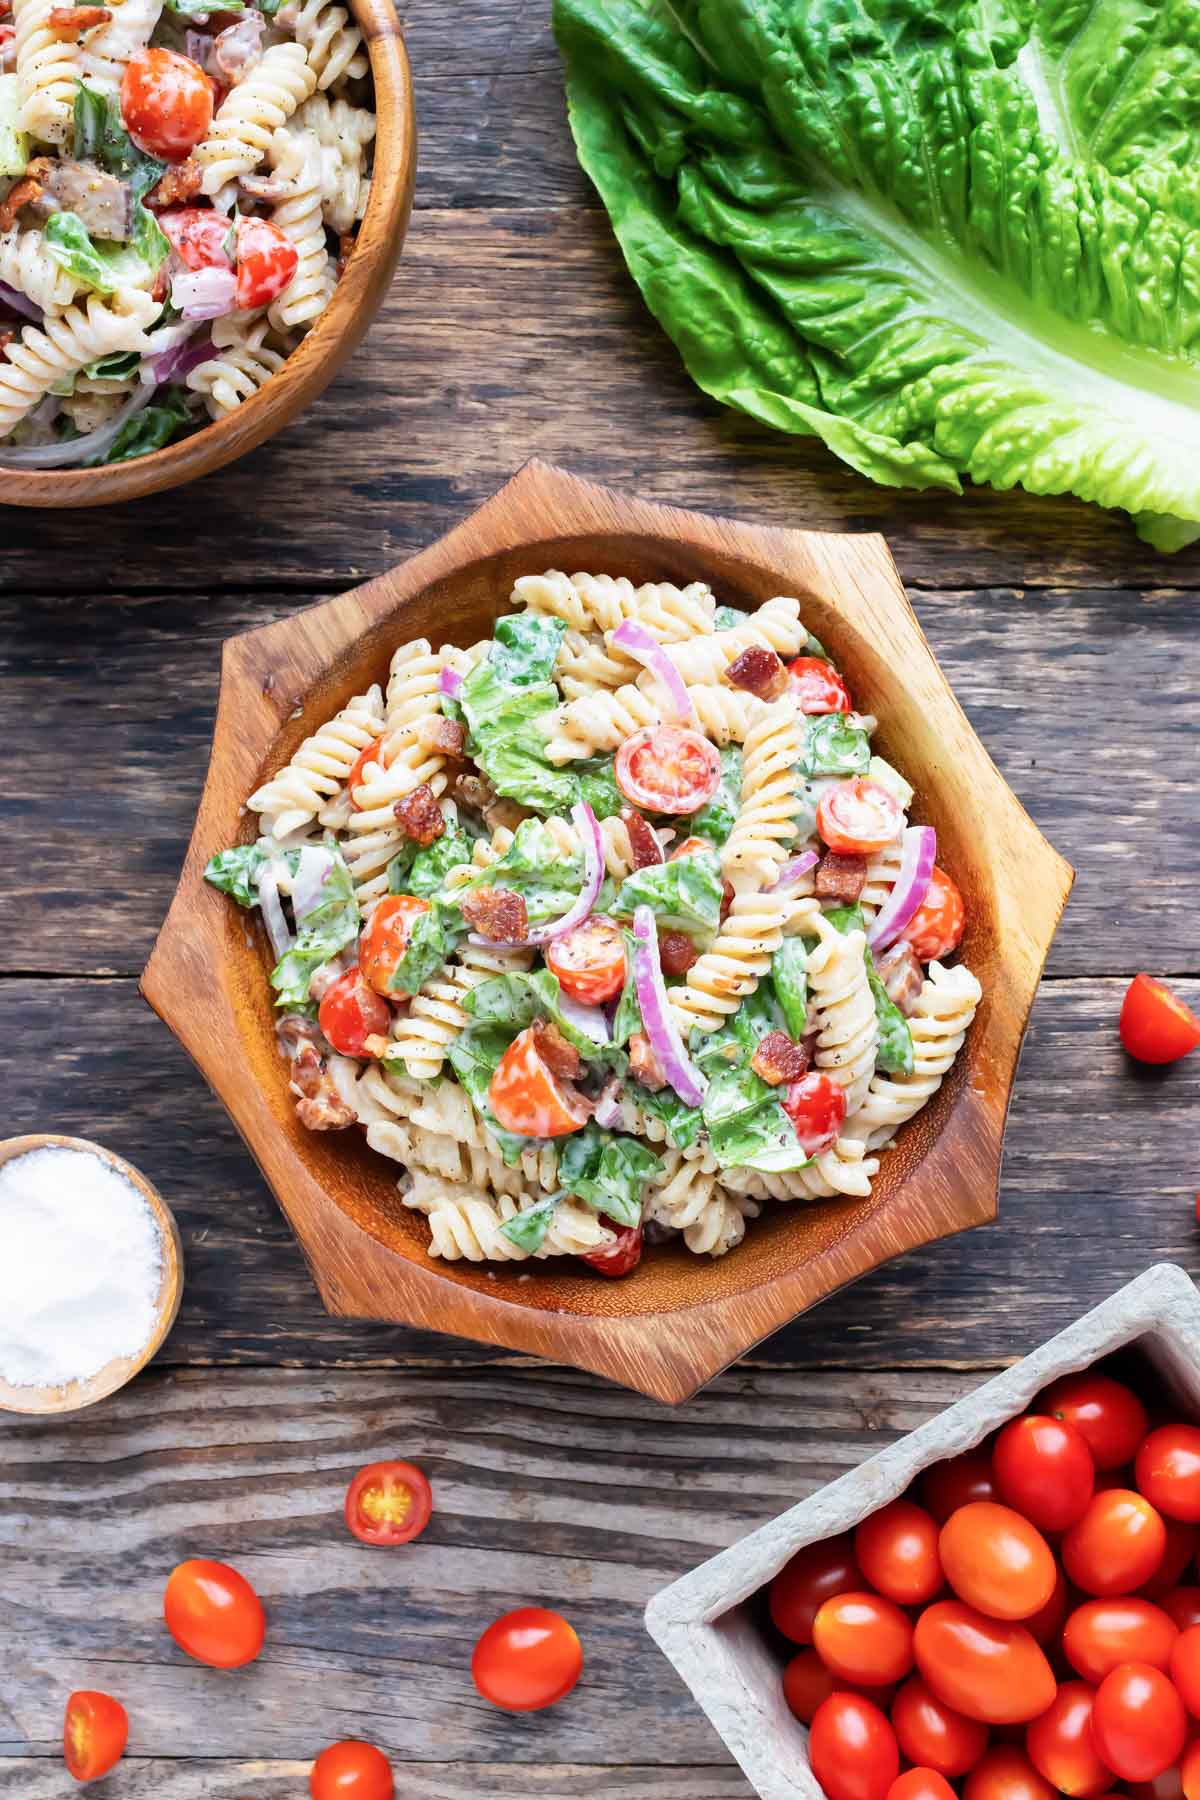 Pasta salad with bacon, tomatoes, and Ranch dressing in a wooden bowl next to Romaine lettuce.